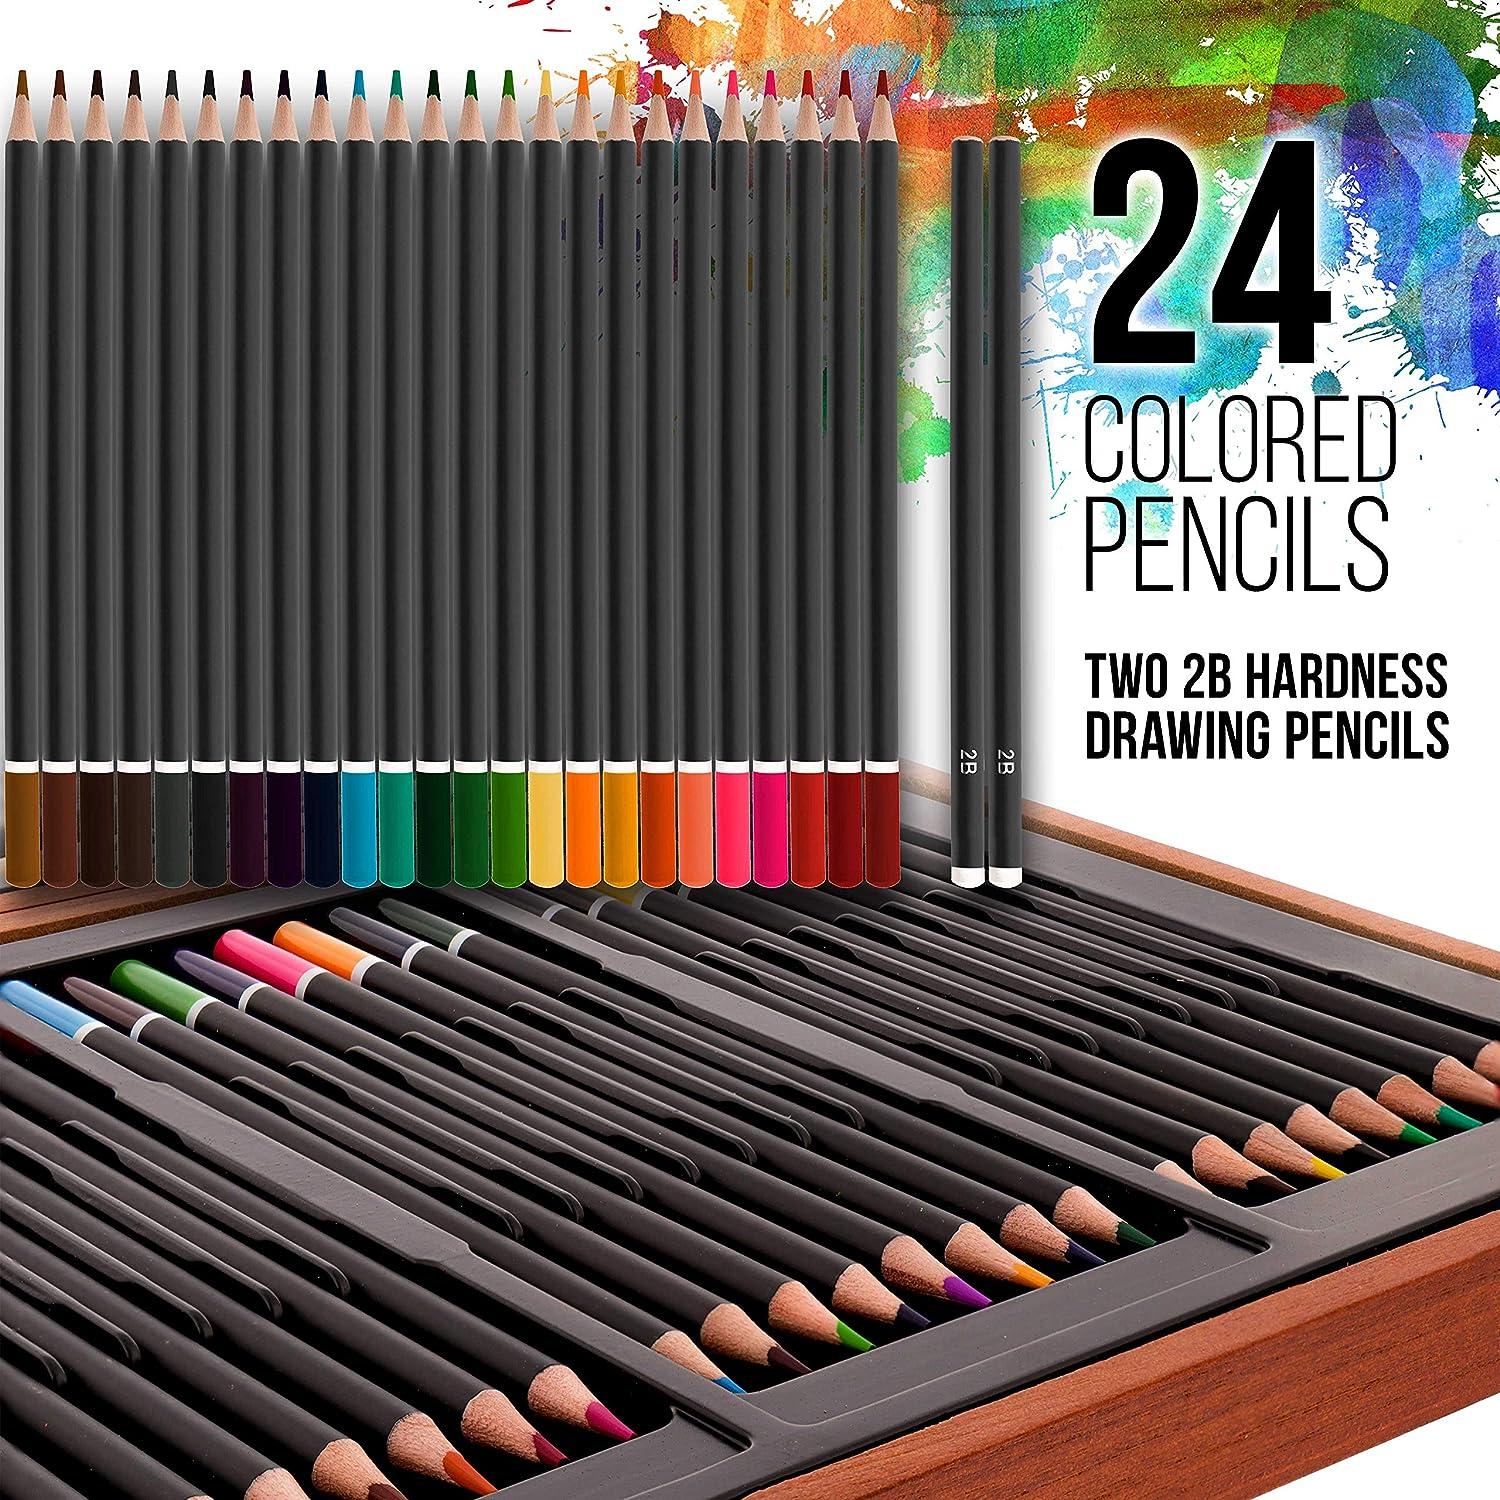 U.S. Art Supply 163-Piece Mega Deluxe Art Painting, Drawing Set in Wood  Box, Desk Easel - Artist Painting Pad, 2 Sketch Pads, 24 Watercolor Paint  Colors, 24 Oil Pastels, 24 Colored Pencils, 60 Crayons 